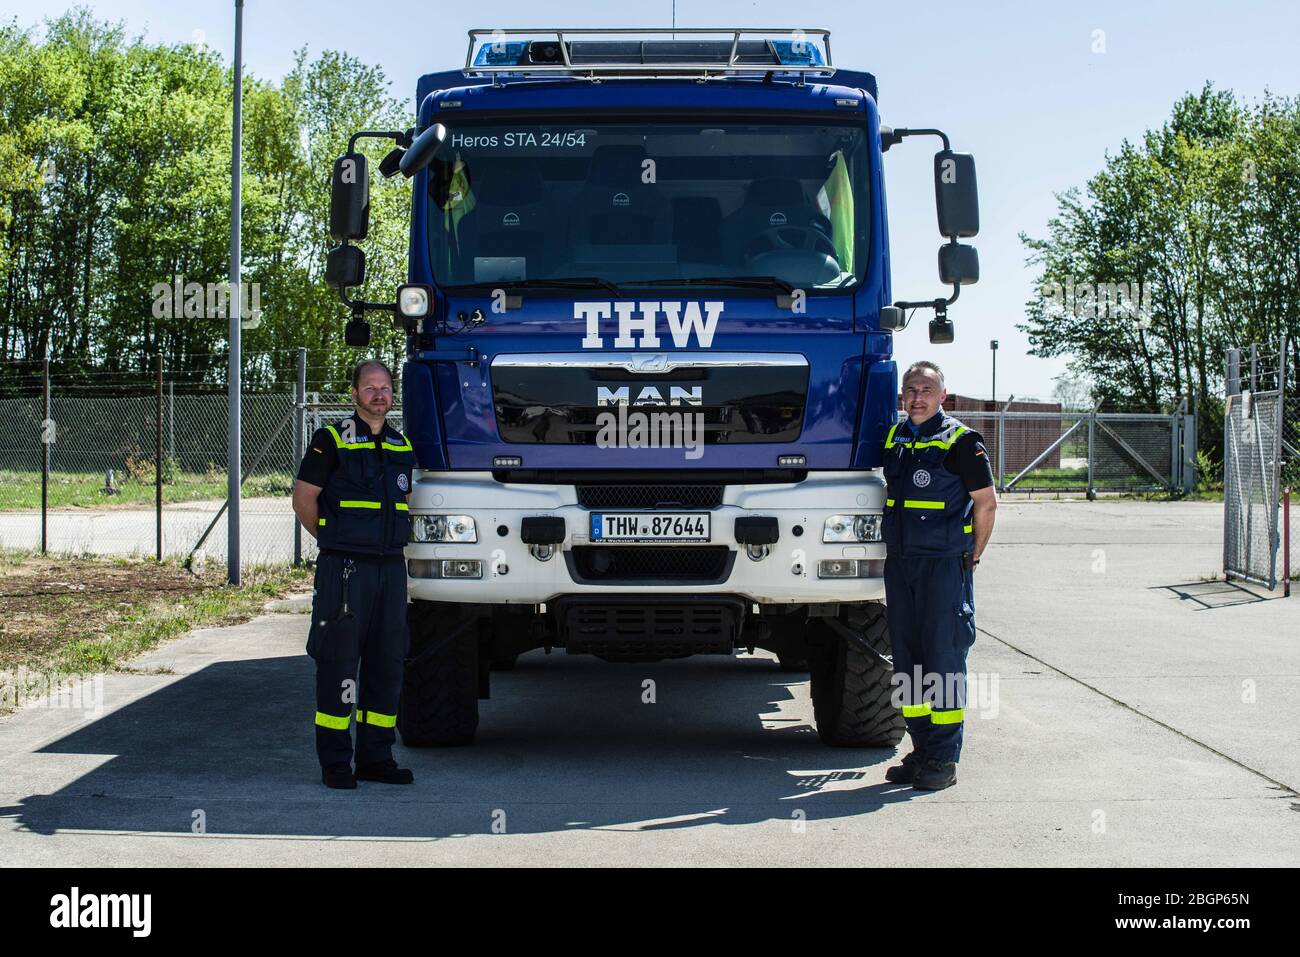 April 22, 2020, Neubiberg Bei Muenchen, Bavaria, Germany: The German Technisches Hilfswerk was on hand at the Bundeswehr University near Munich to assist the military in making industrial-quality surface disinfectants to battle against Coronavirus. Stock Photo